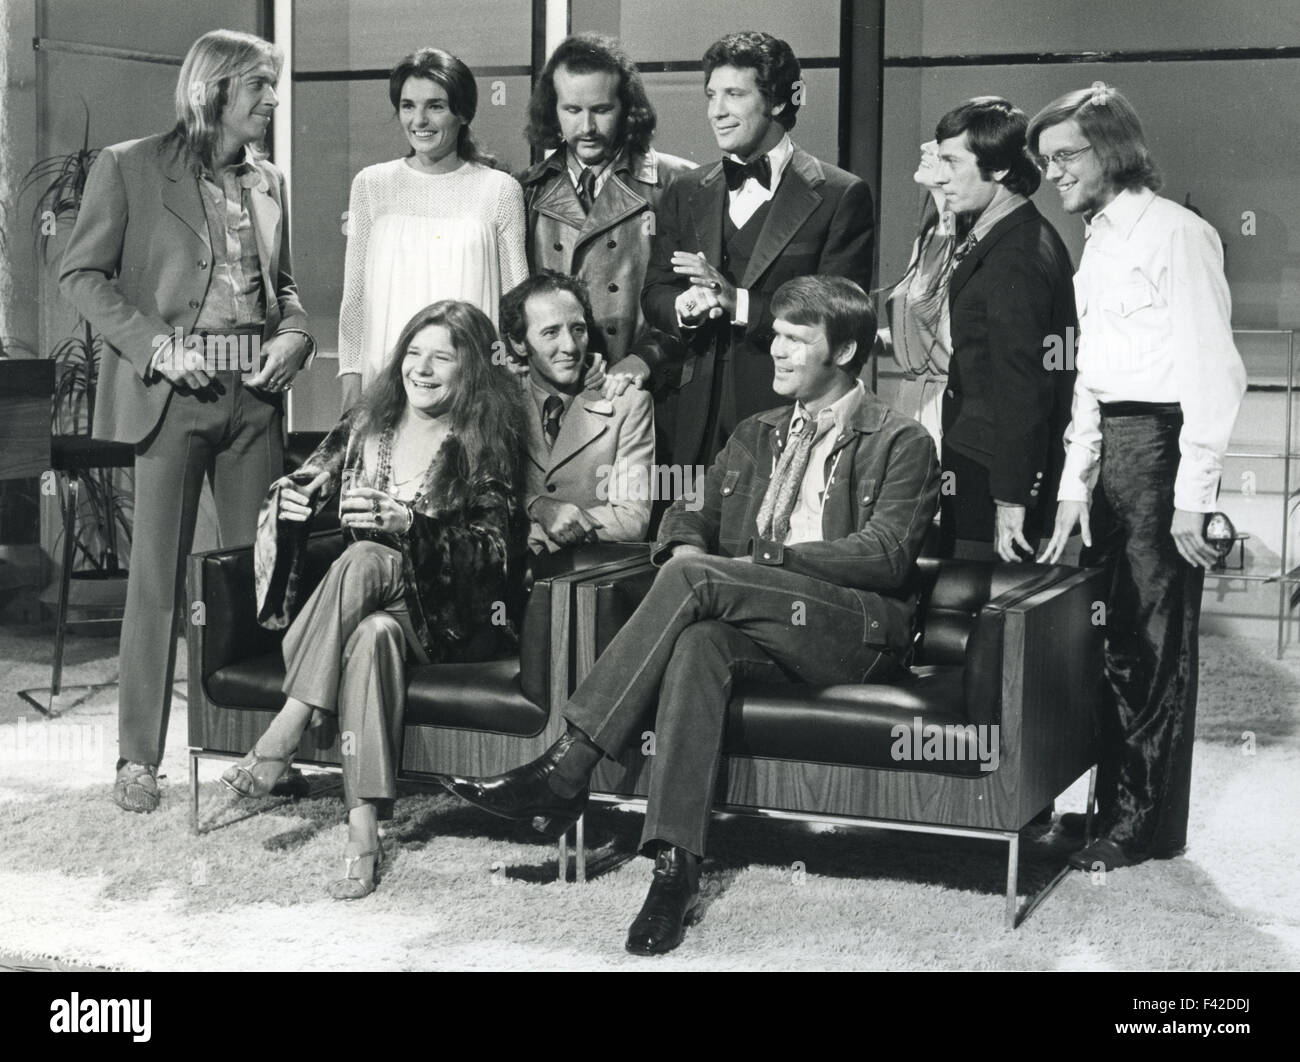 TOM JONES Welsh singer on his TV show 'This is Tom Jones' in April 1969. Jones in bow tie. Glen Campbell seated at right and Janis Joplin at left. Others are members of American comedy group The Committee. Stock Photo